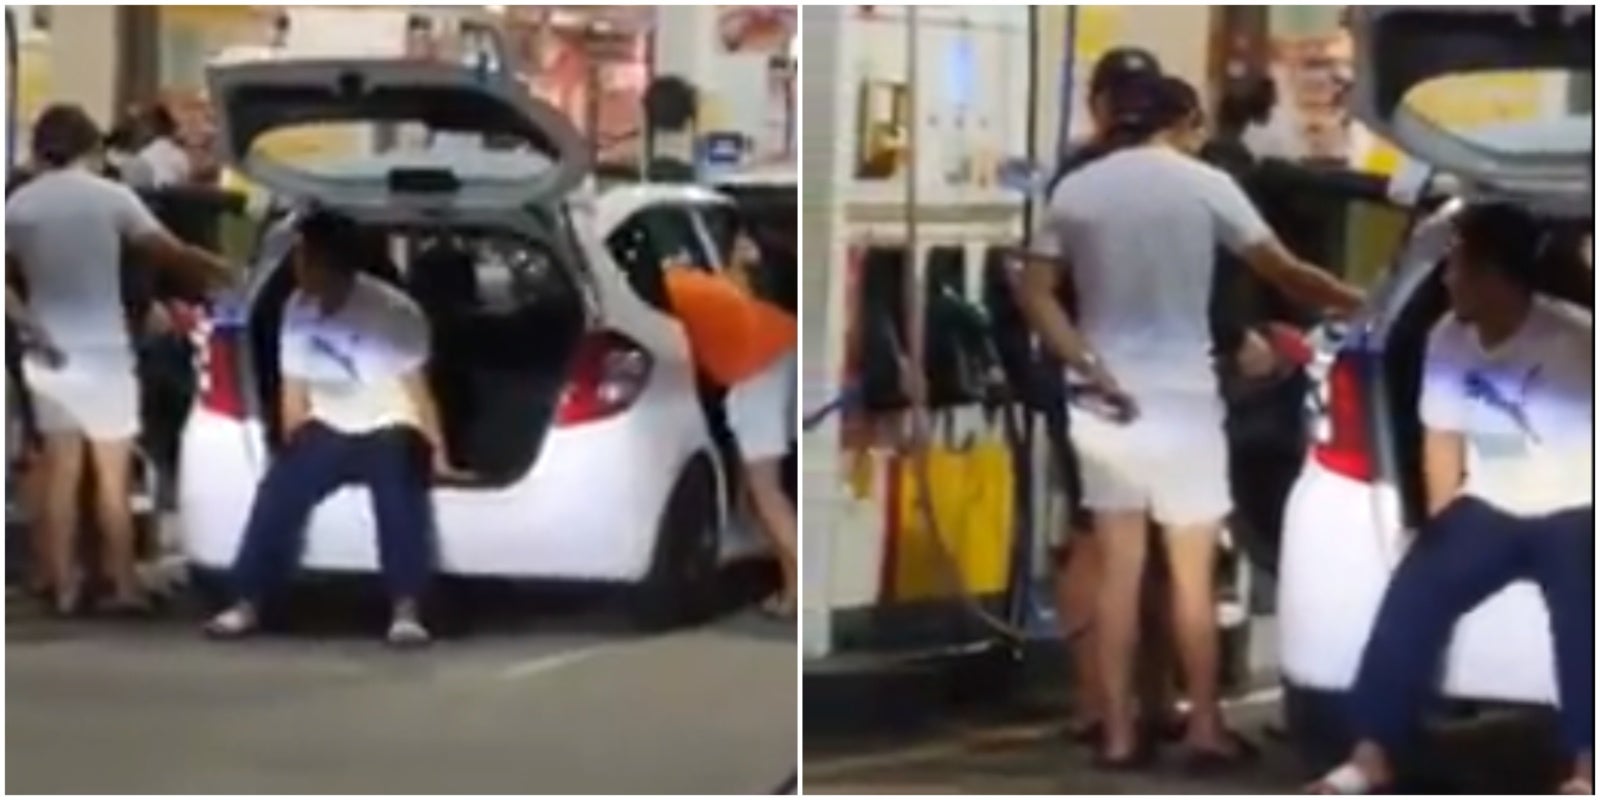 Netizens Amused by Antics of 4 S'porean Men Who Tried Shaking Car in JB to Refill More Petrol - WORLD OF BUZZ